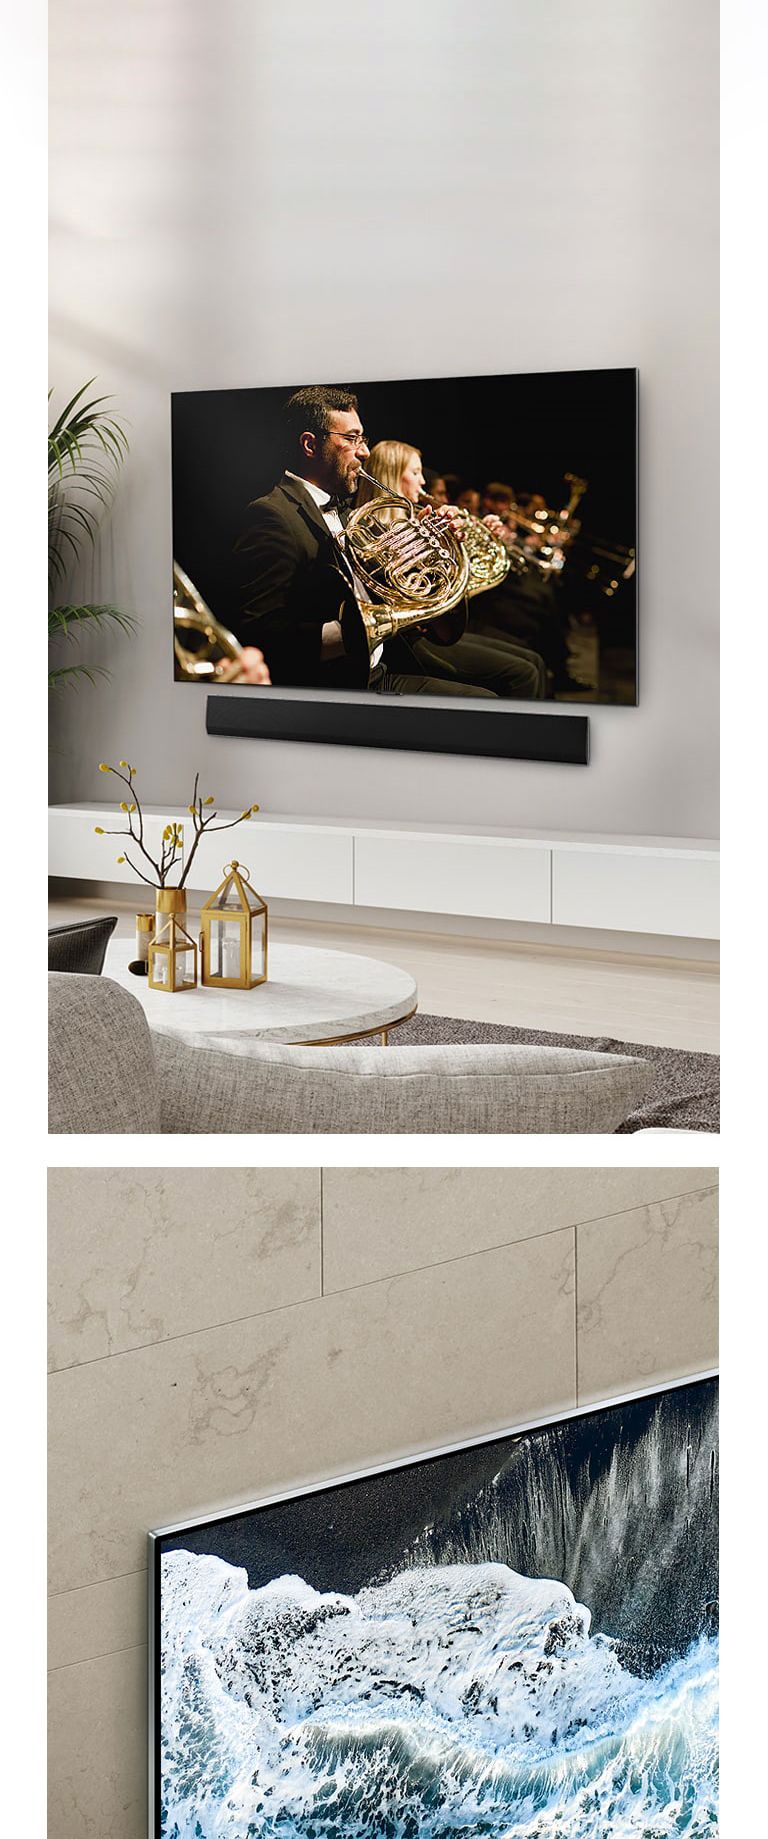 A side view of the LG OLED G4 displaying an elegant abstract artwork and LG Soundbar flat against the wall in a modern living space.